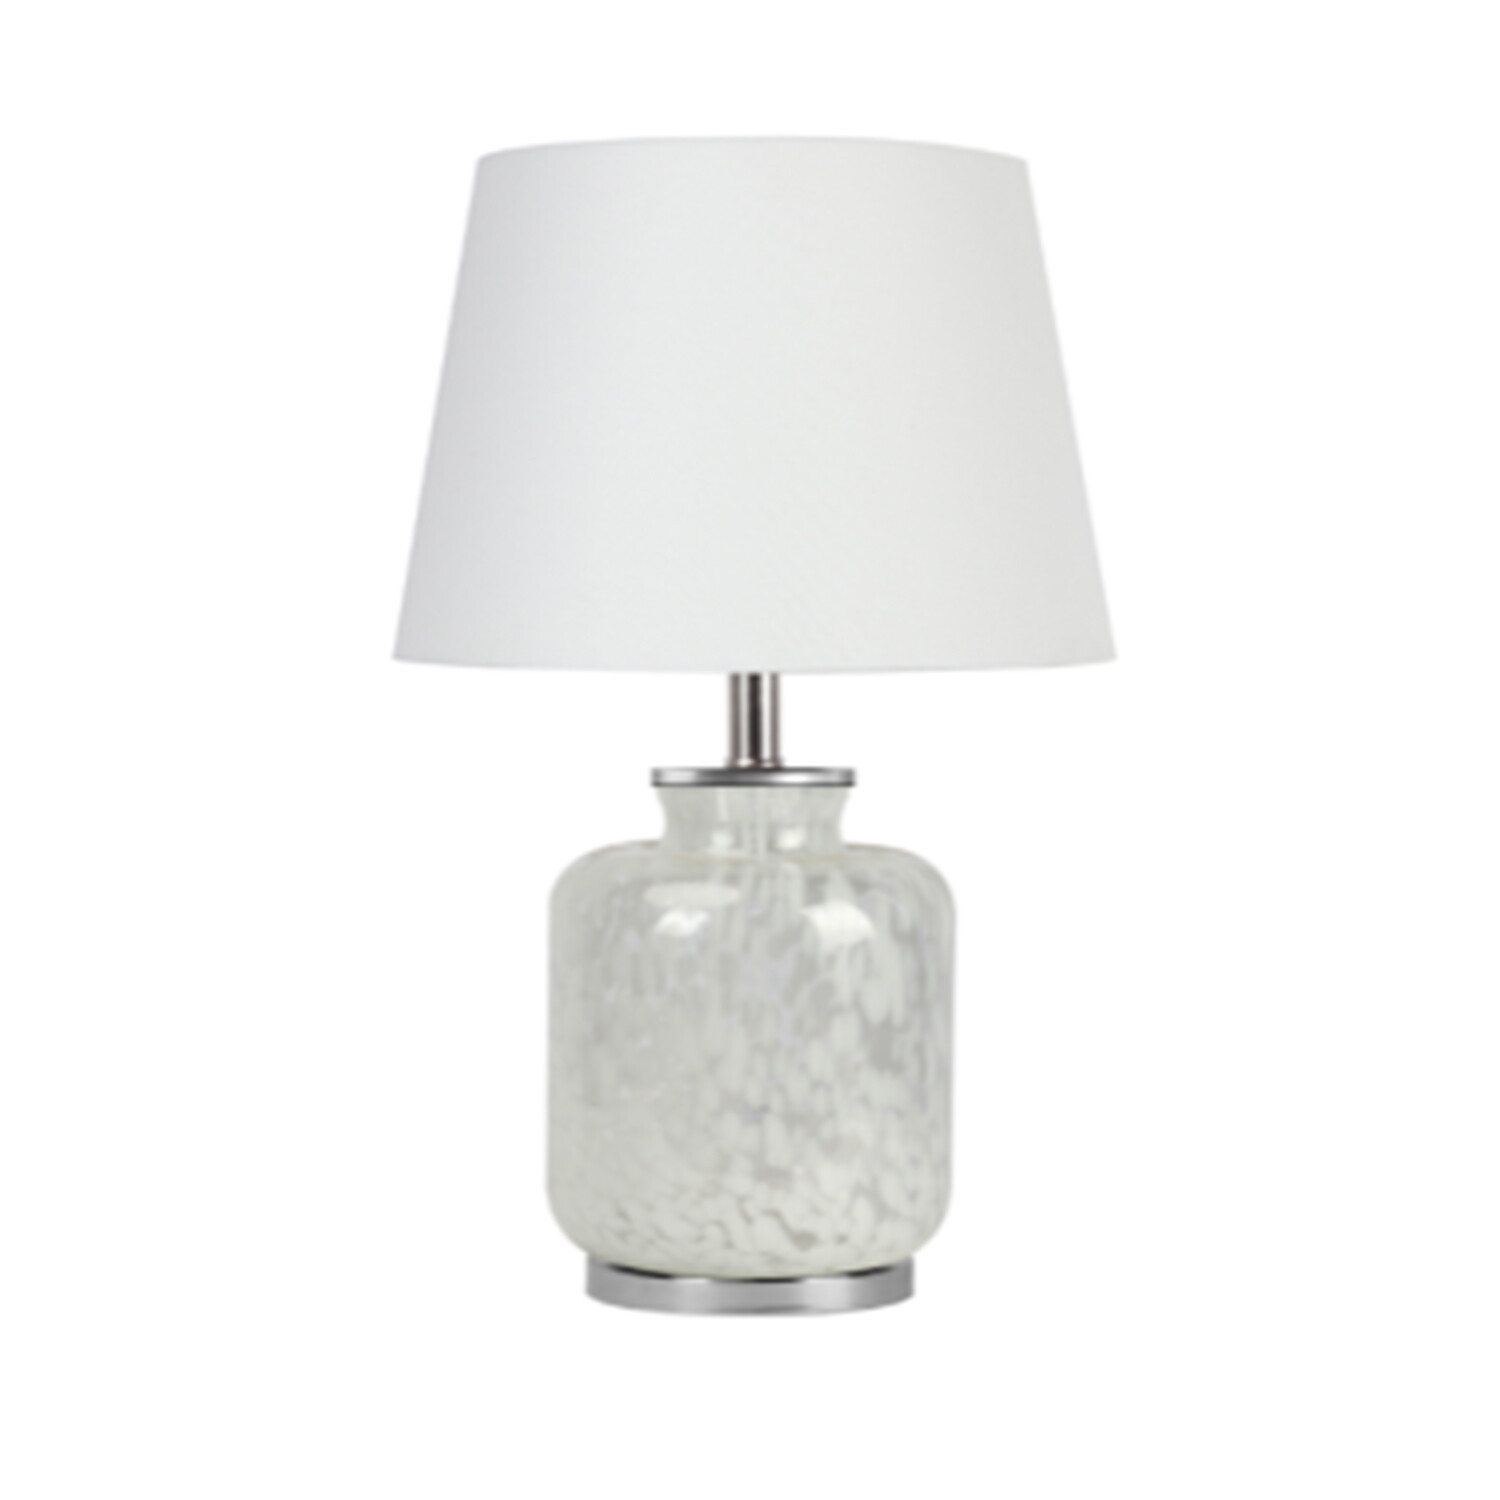 Arianna Grey and White Table Lamp Image 1